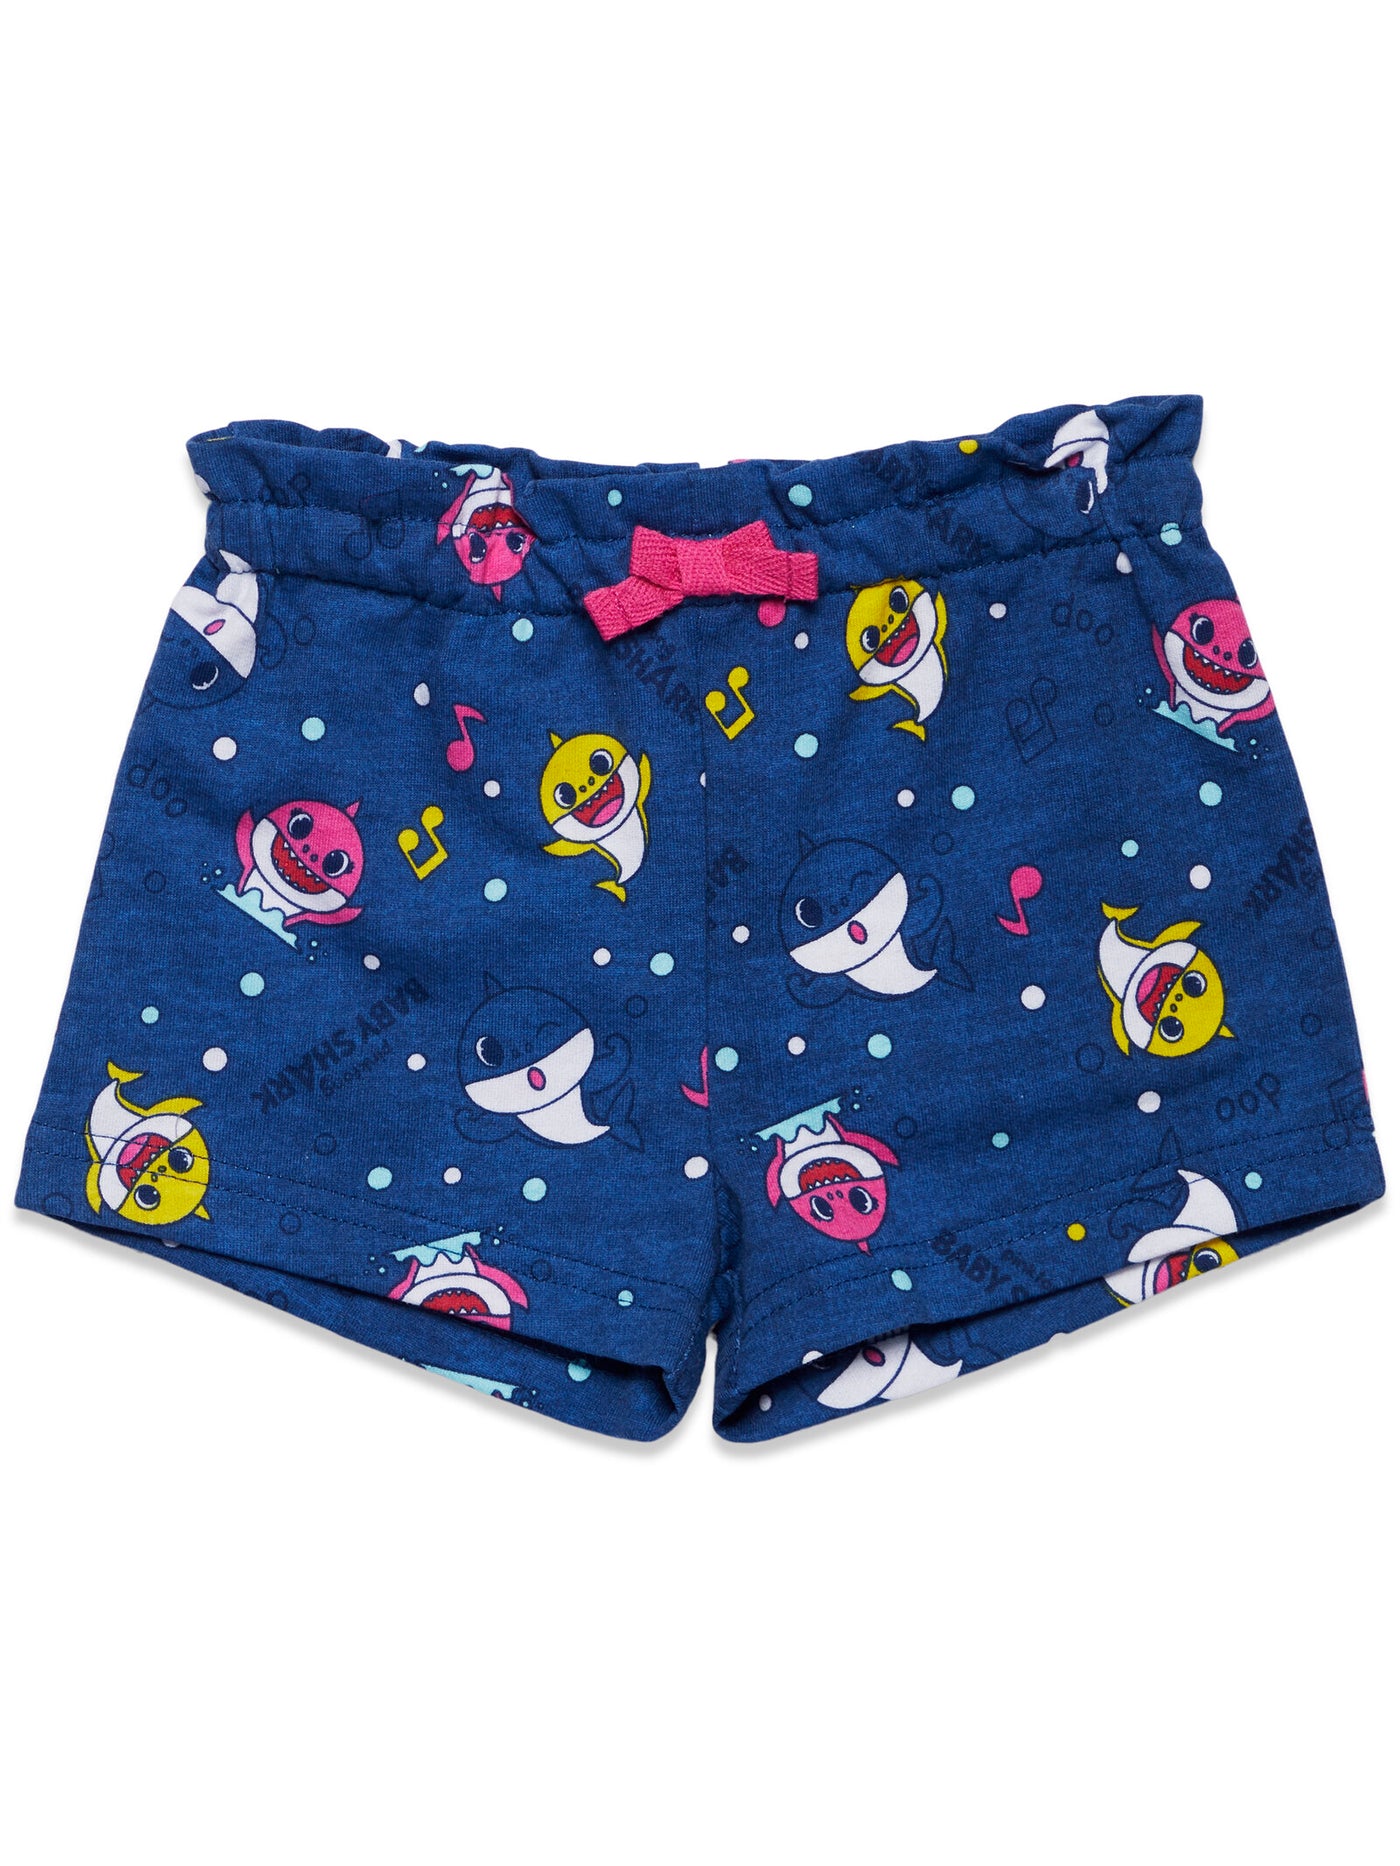 Pinkfong Baby Shark French Terry Sleeveless Graphic T-Shirt & French Terry Shorts Set